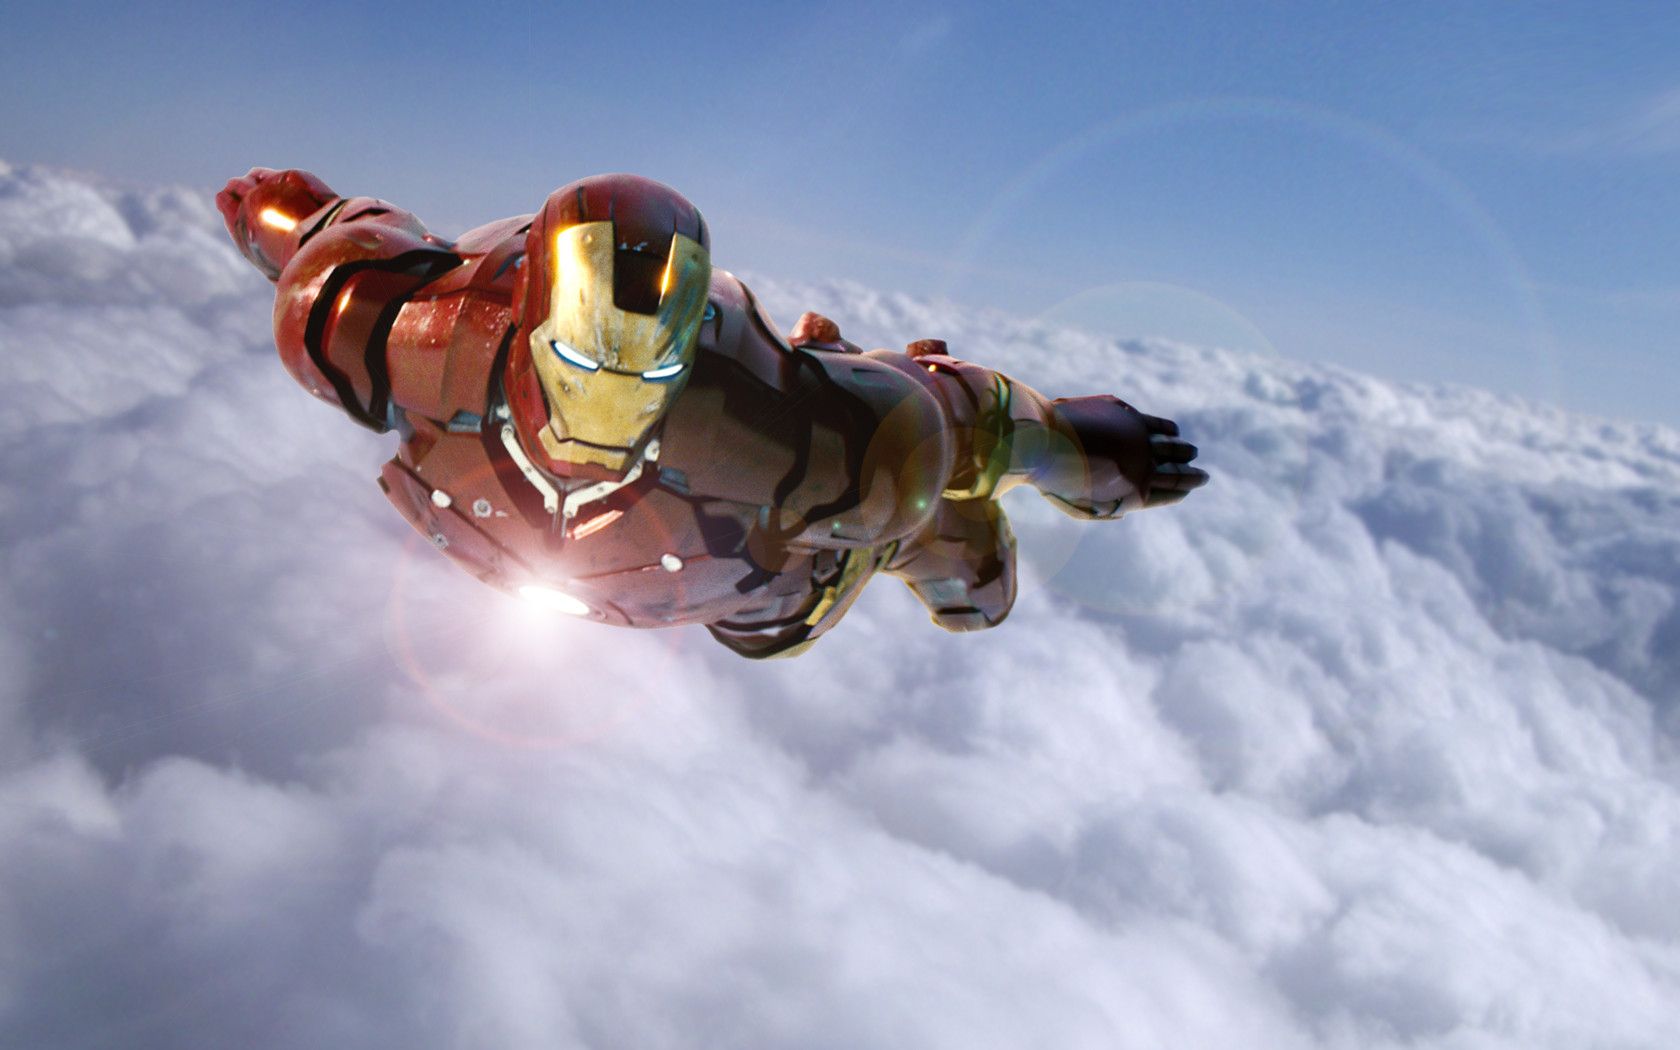 Iron Man with the help of his armor is one of the fastest marvel superhero